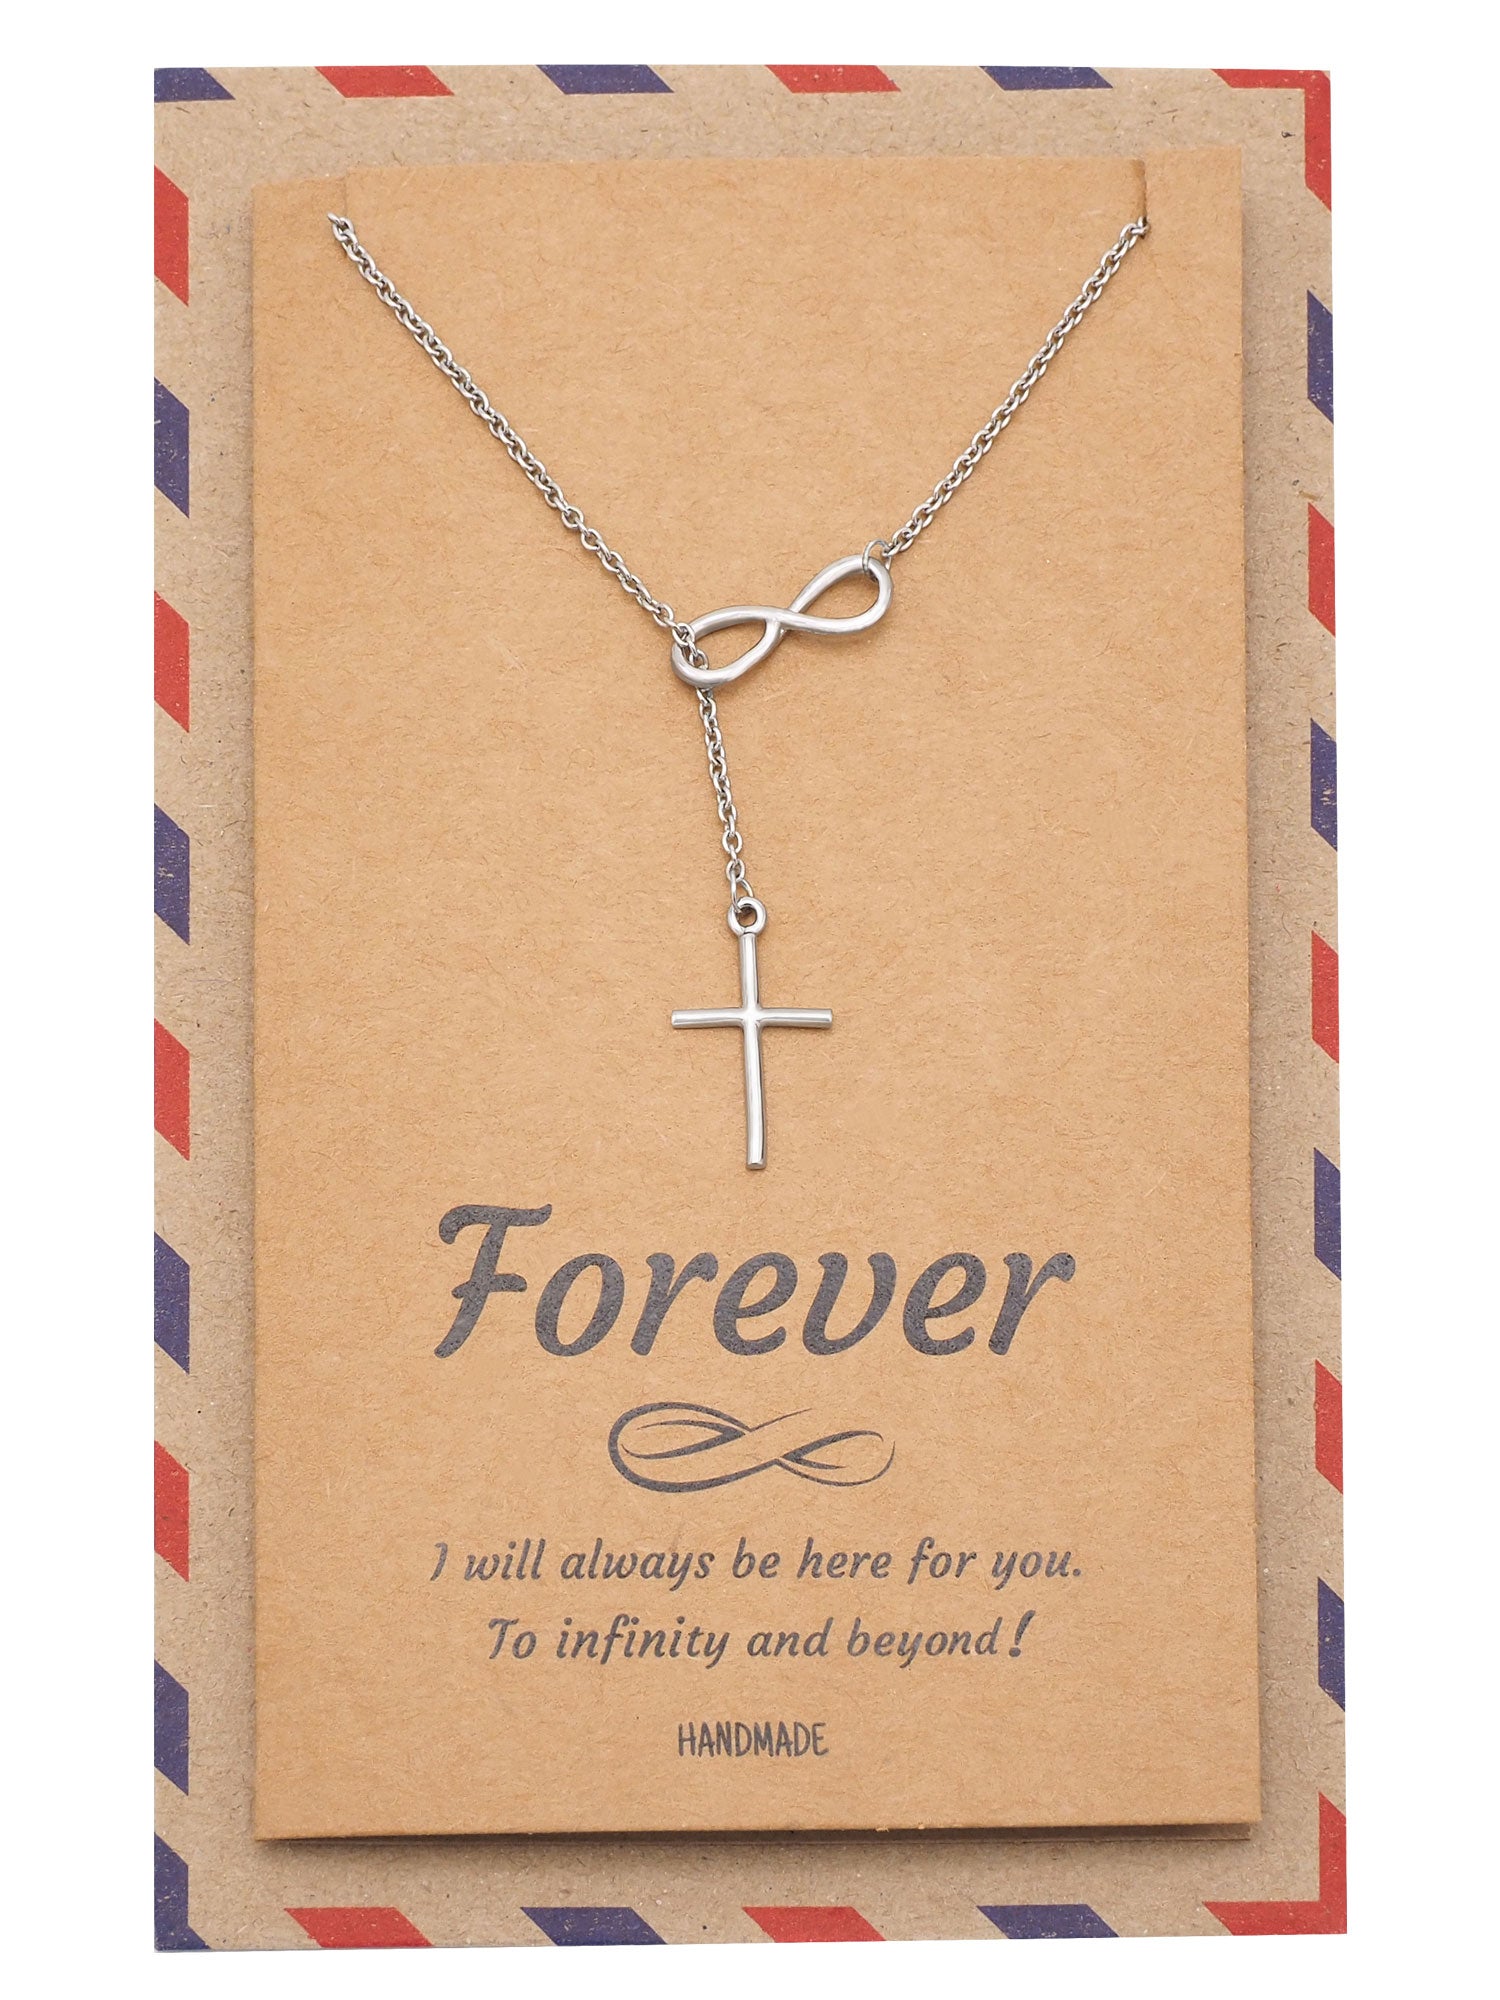 infinity necklace 0316cd3d 0700 4c5f ae93